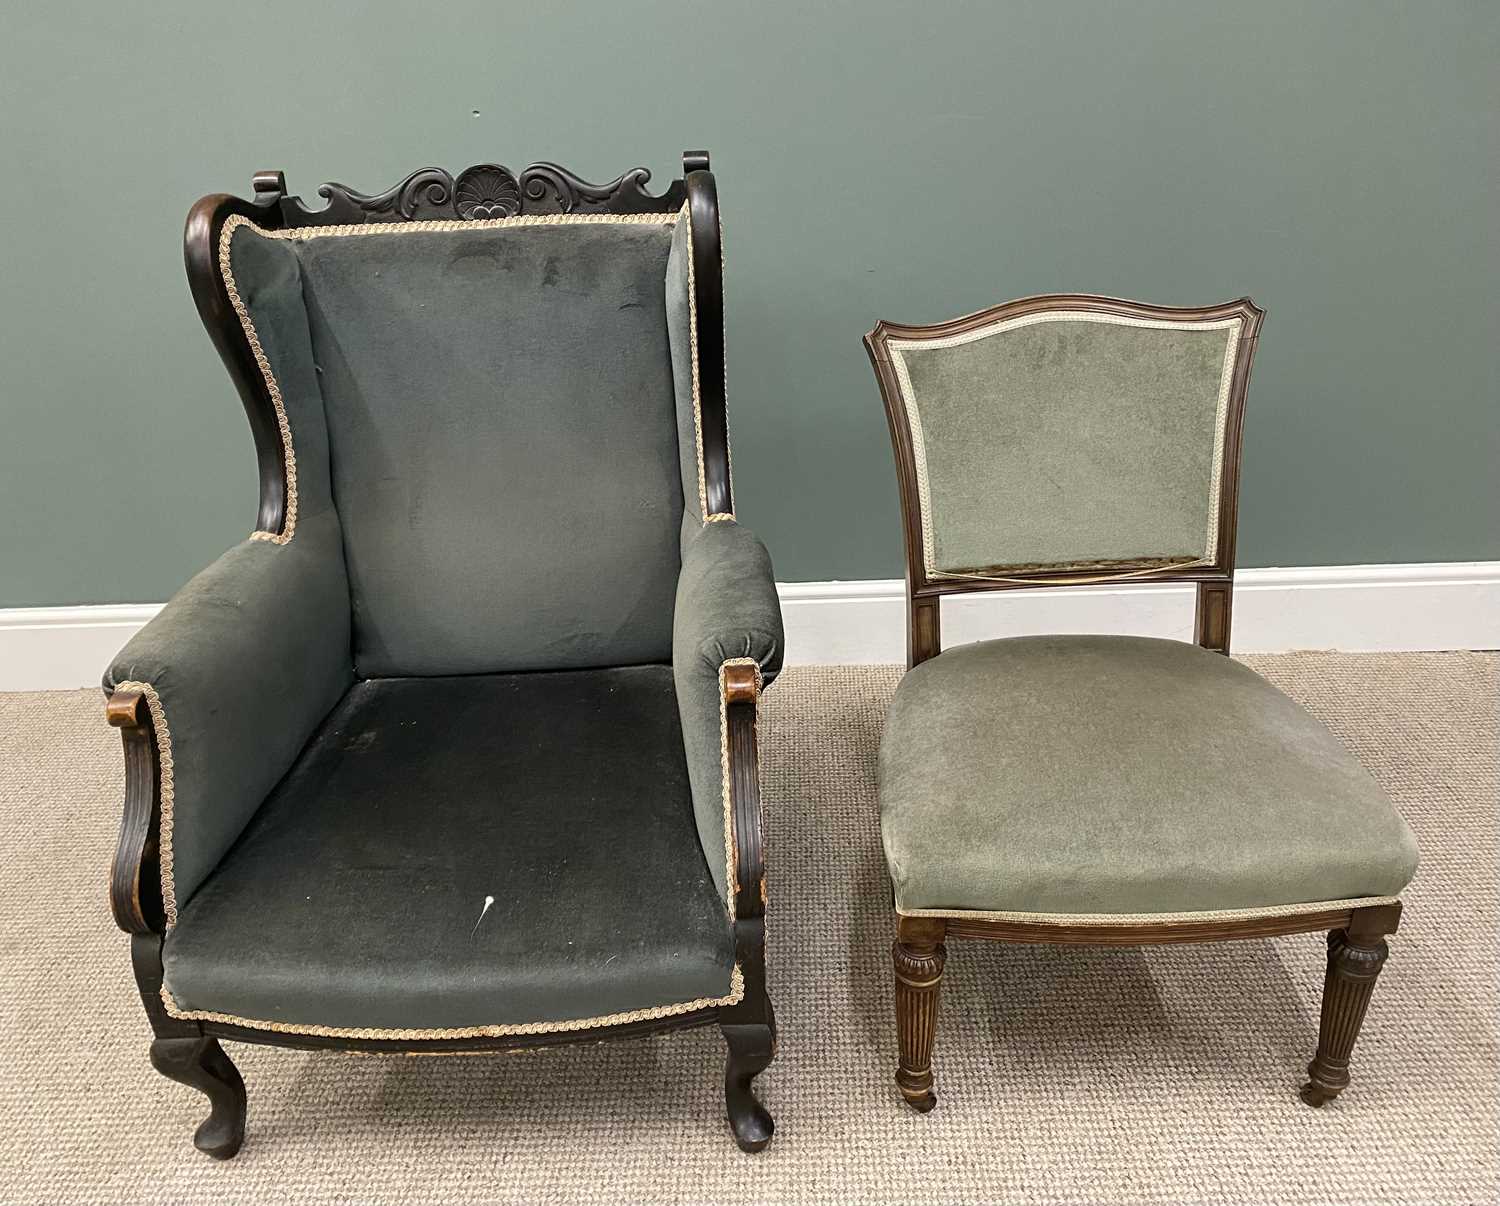 PLUS LOT 40 - TWO VINTAGE CHAIRS IN GREEN DRALON UPHOLSTERY, lot comprising a late 19th Century